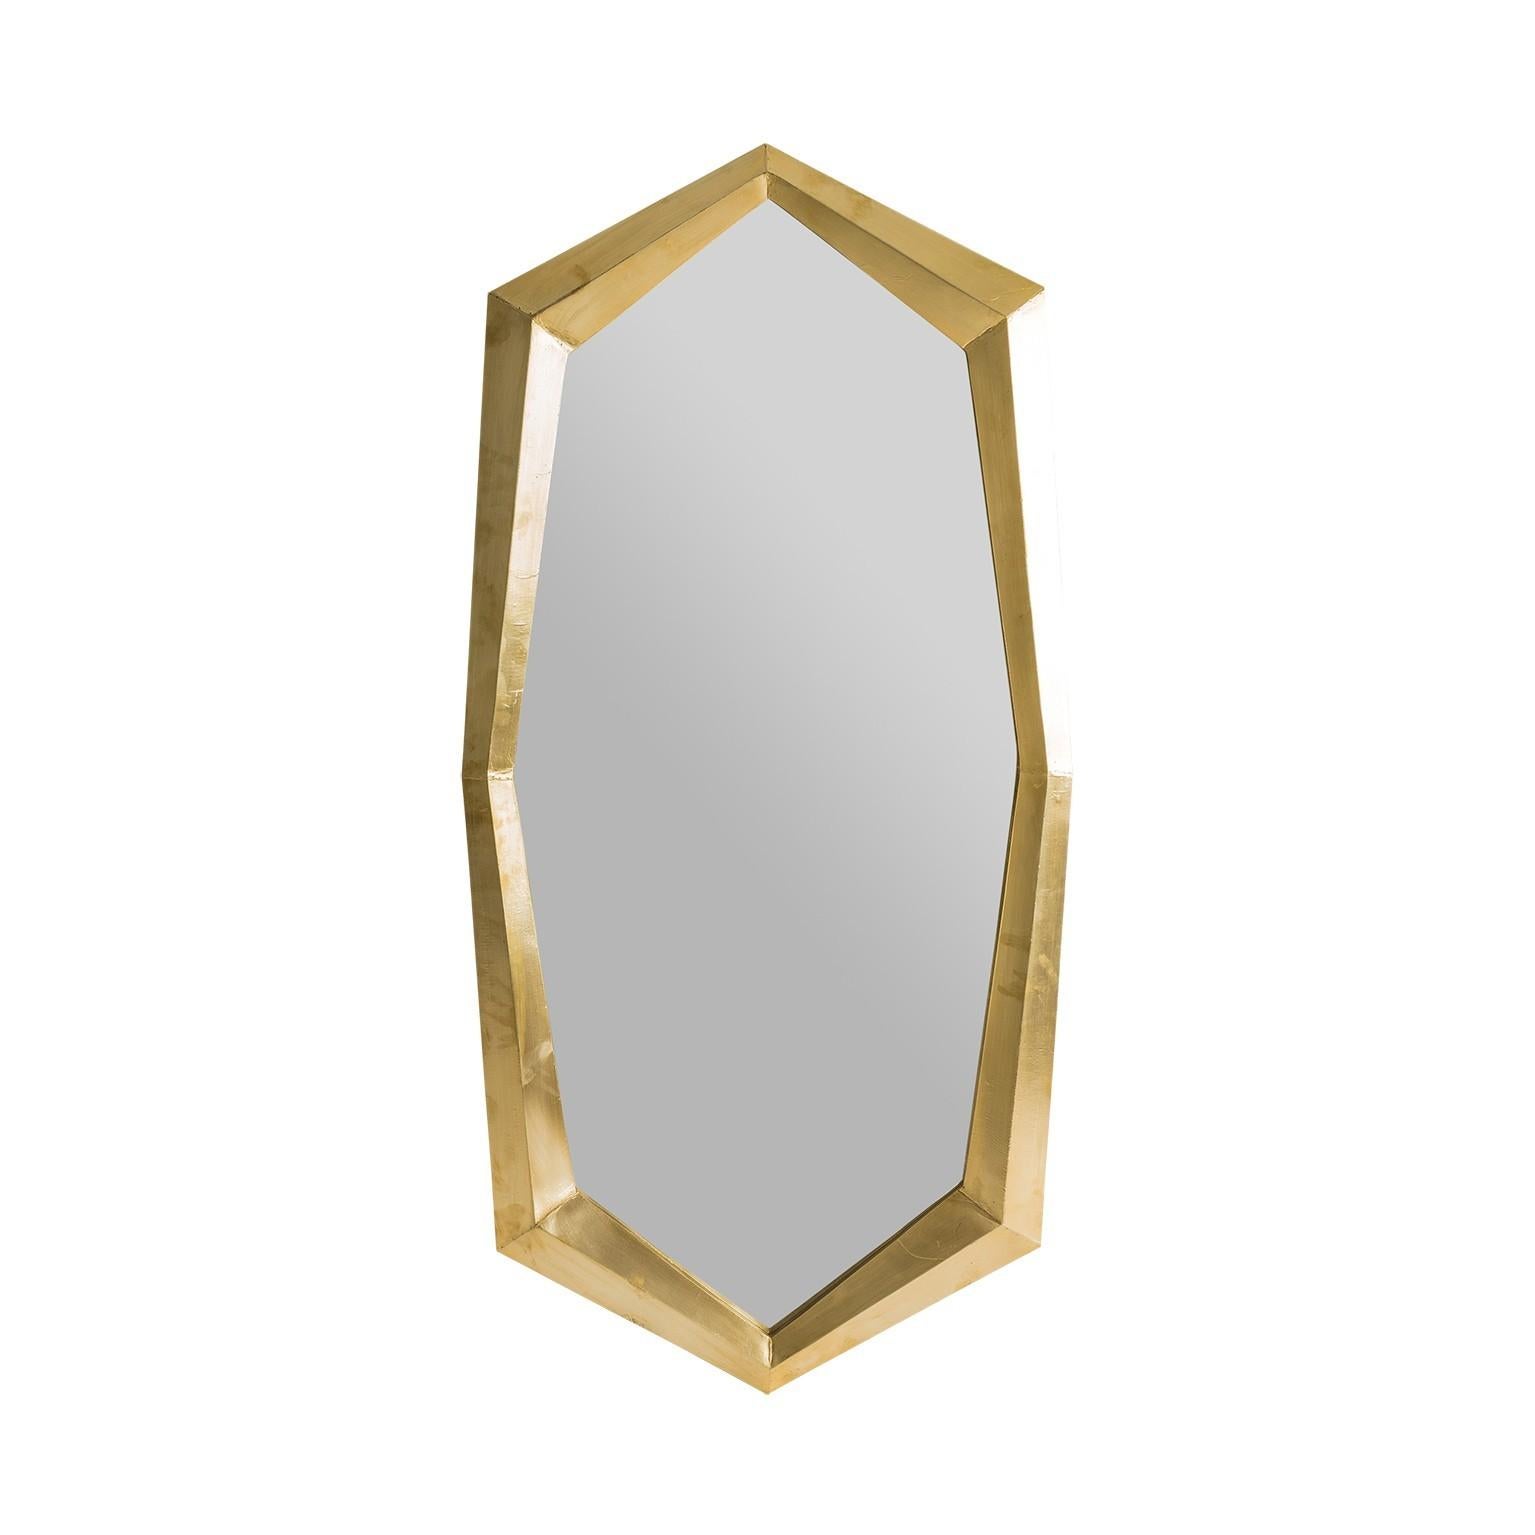 Large wooden gold patina and design mirror shaped as a diamond.